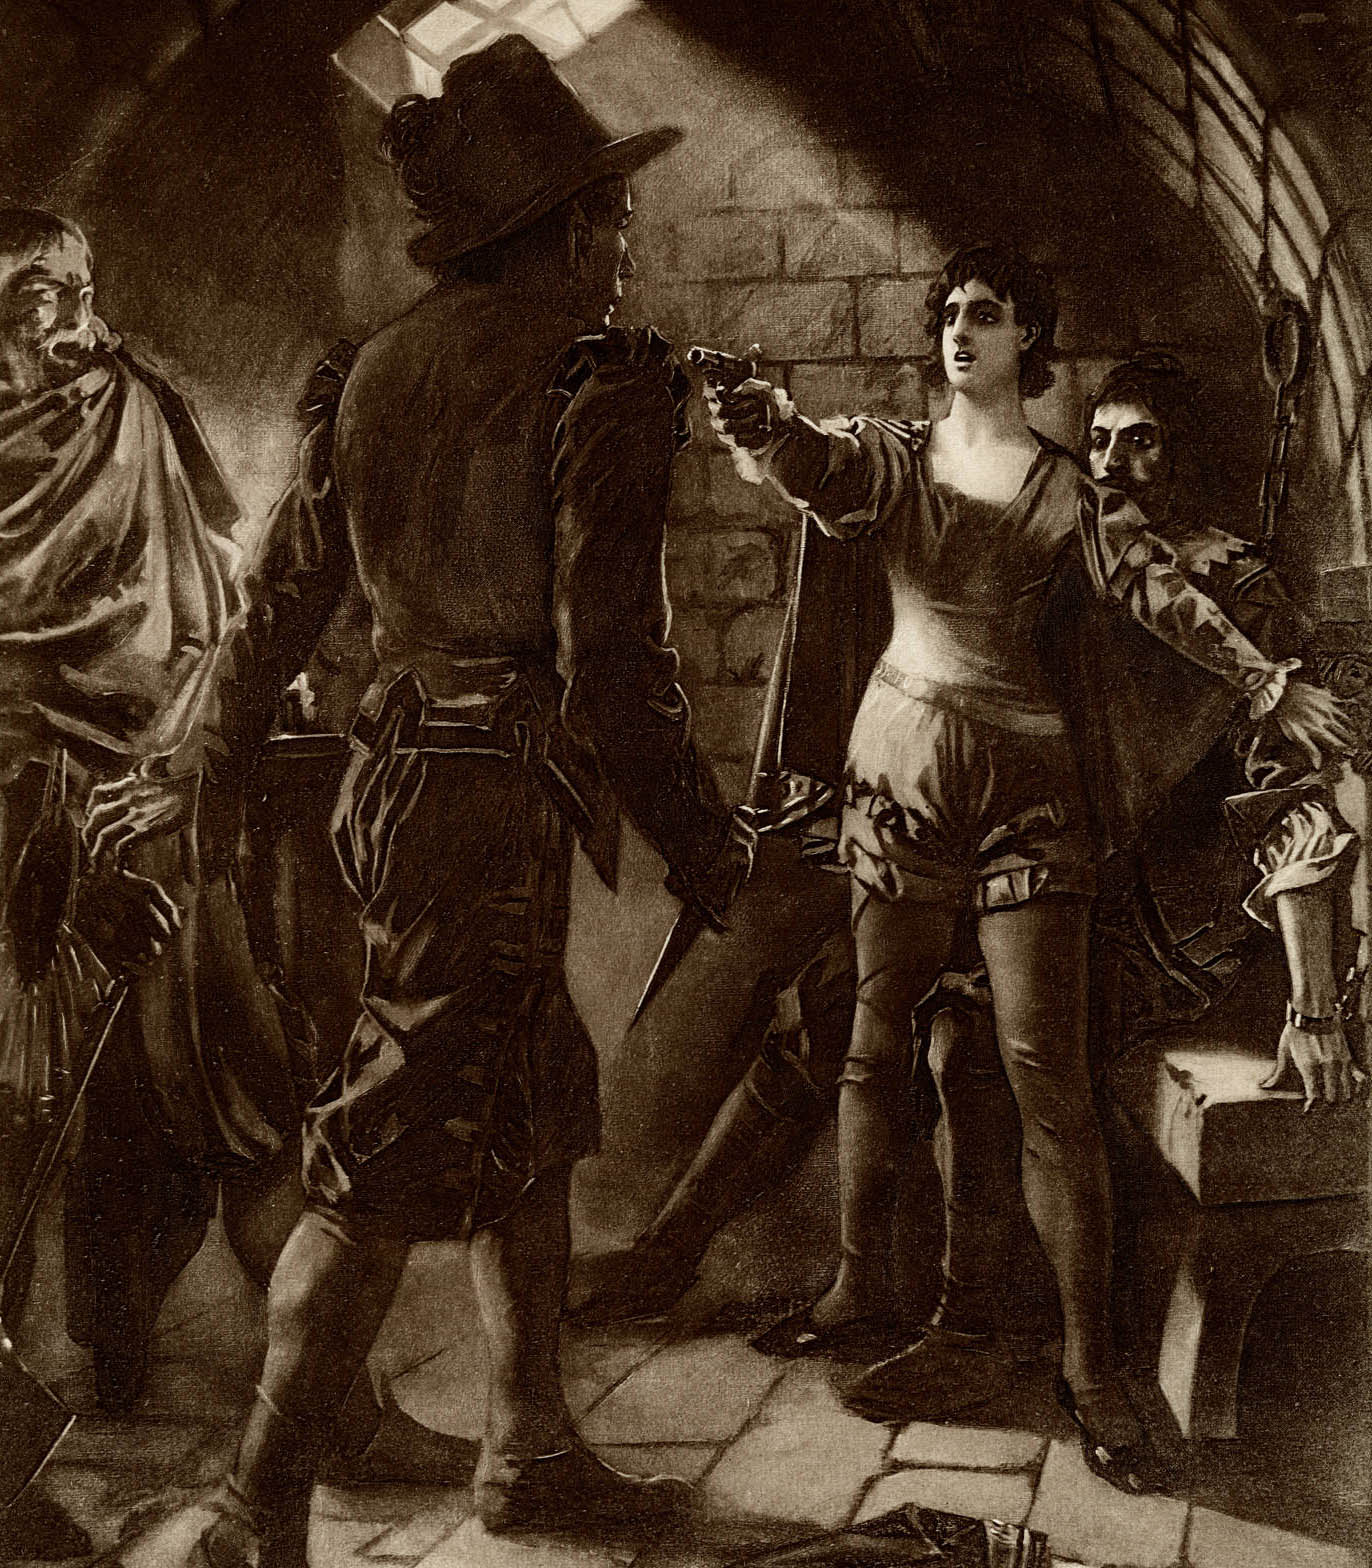 Don Pizarro, with his knife drawn, is approaching Florestan. Leonora, illuminated by light shining through the cell window, is shielding Florestan. She has drawn and aimed her pistol at Don Pizarro. Both Leonora and Florestan have their backs against the cell wall. 